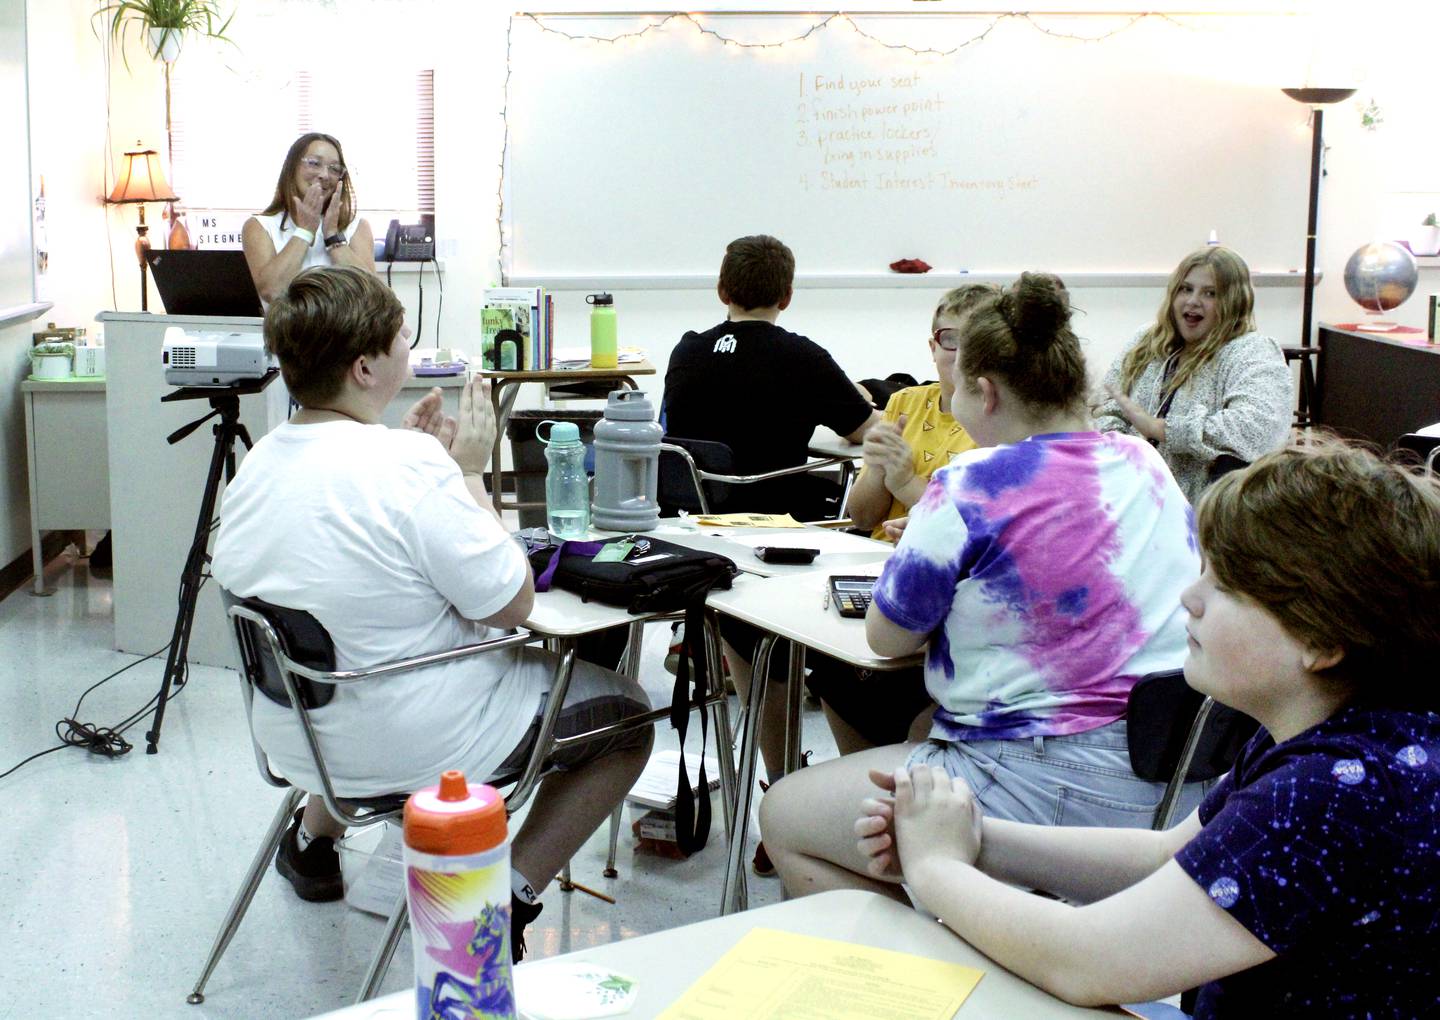 Special education teacher Tracy Siegner is gleefully surprised when one of her students expresses a desire to become a better reader and the whole class breaks out into spontaneous supportive applause during her first day teaching at West Carroll Middle School on Wednesday.